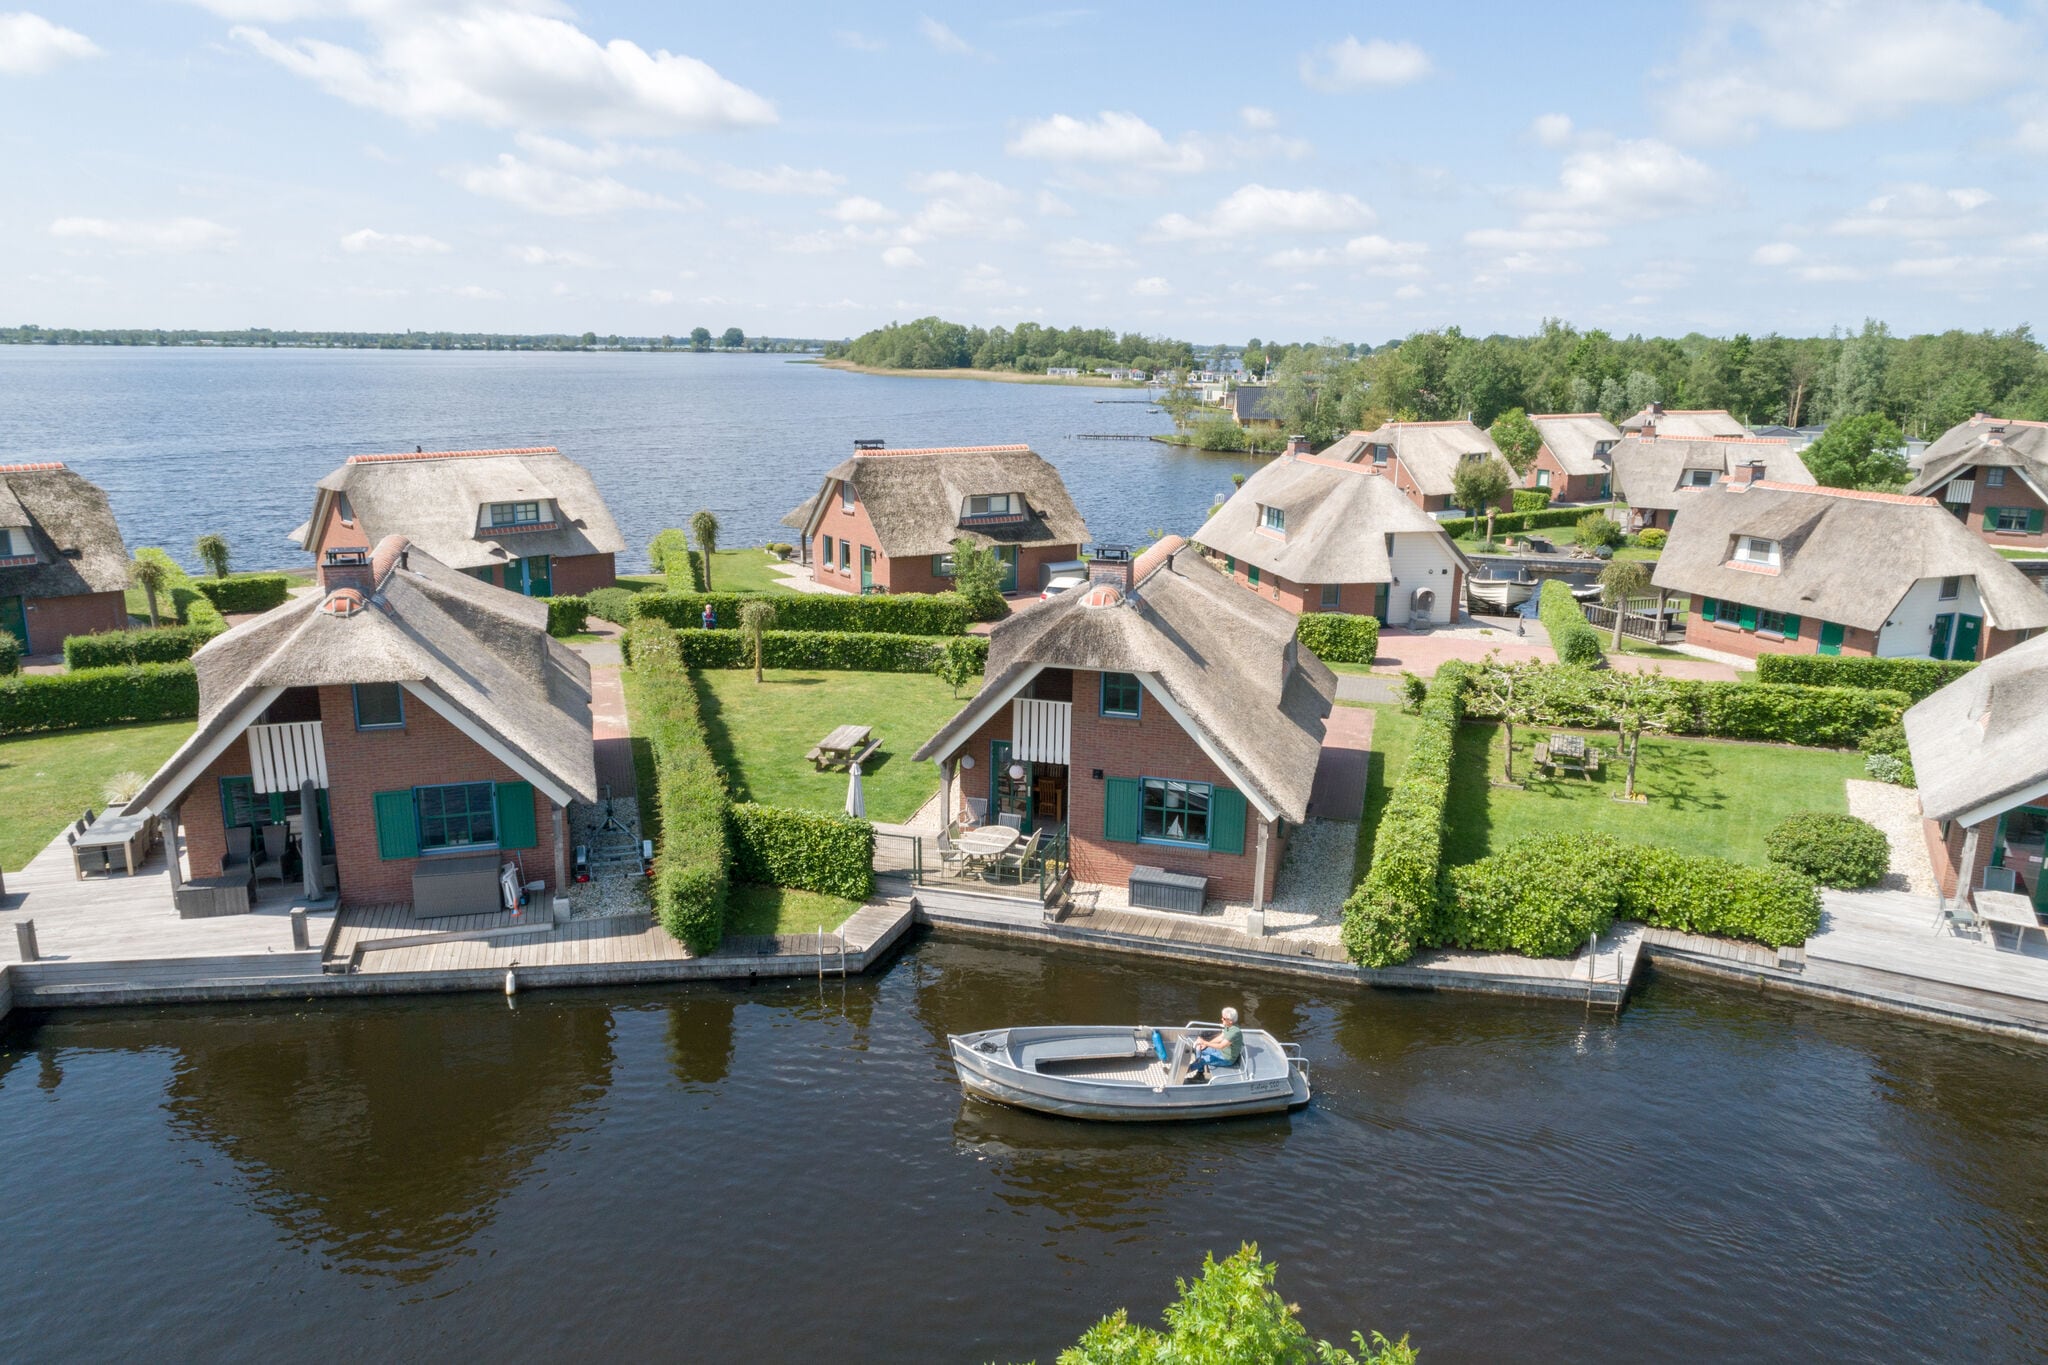 Stylish thatched villa with two bathrooms near Giethoorn